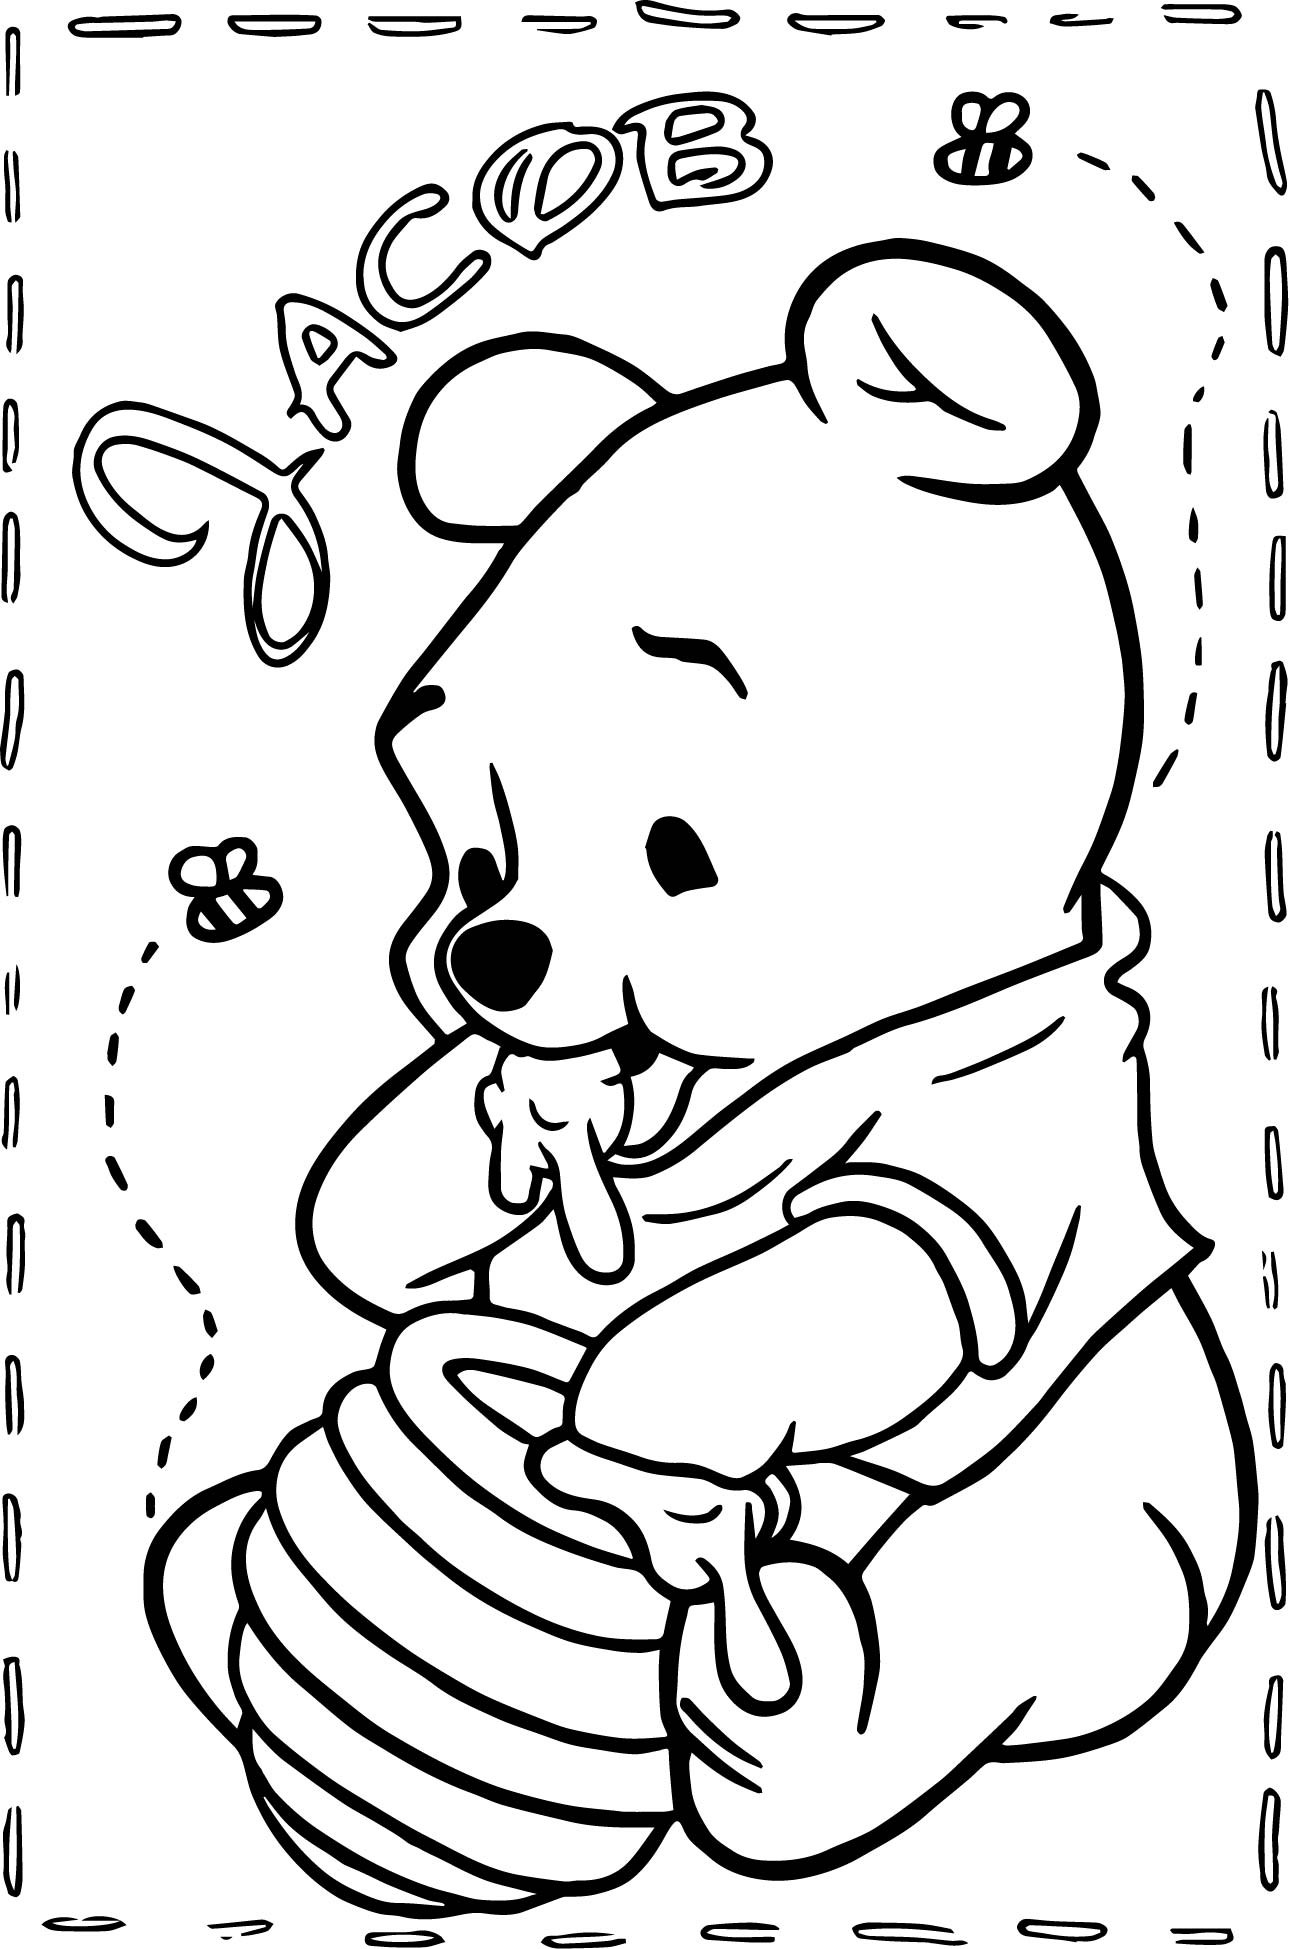 Coloring Book Pages Winnie The Pooh
 Baby Winnie The Pooh Coloring Page